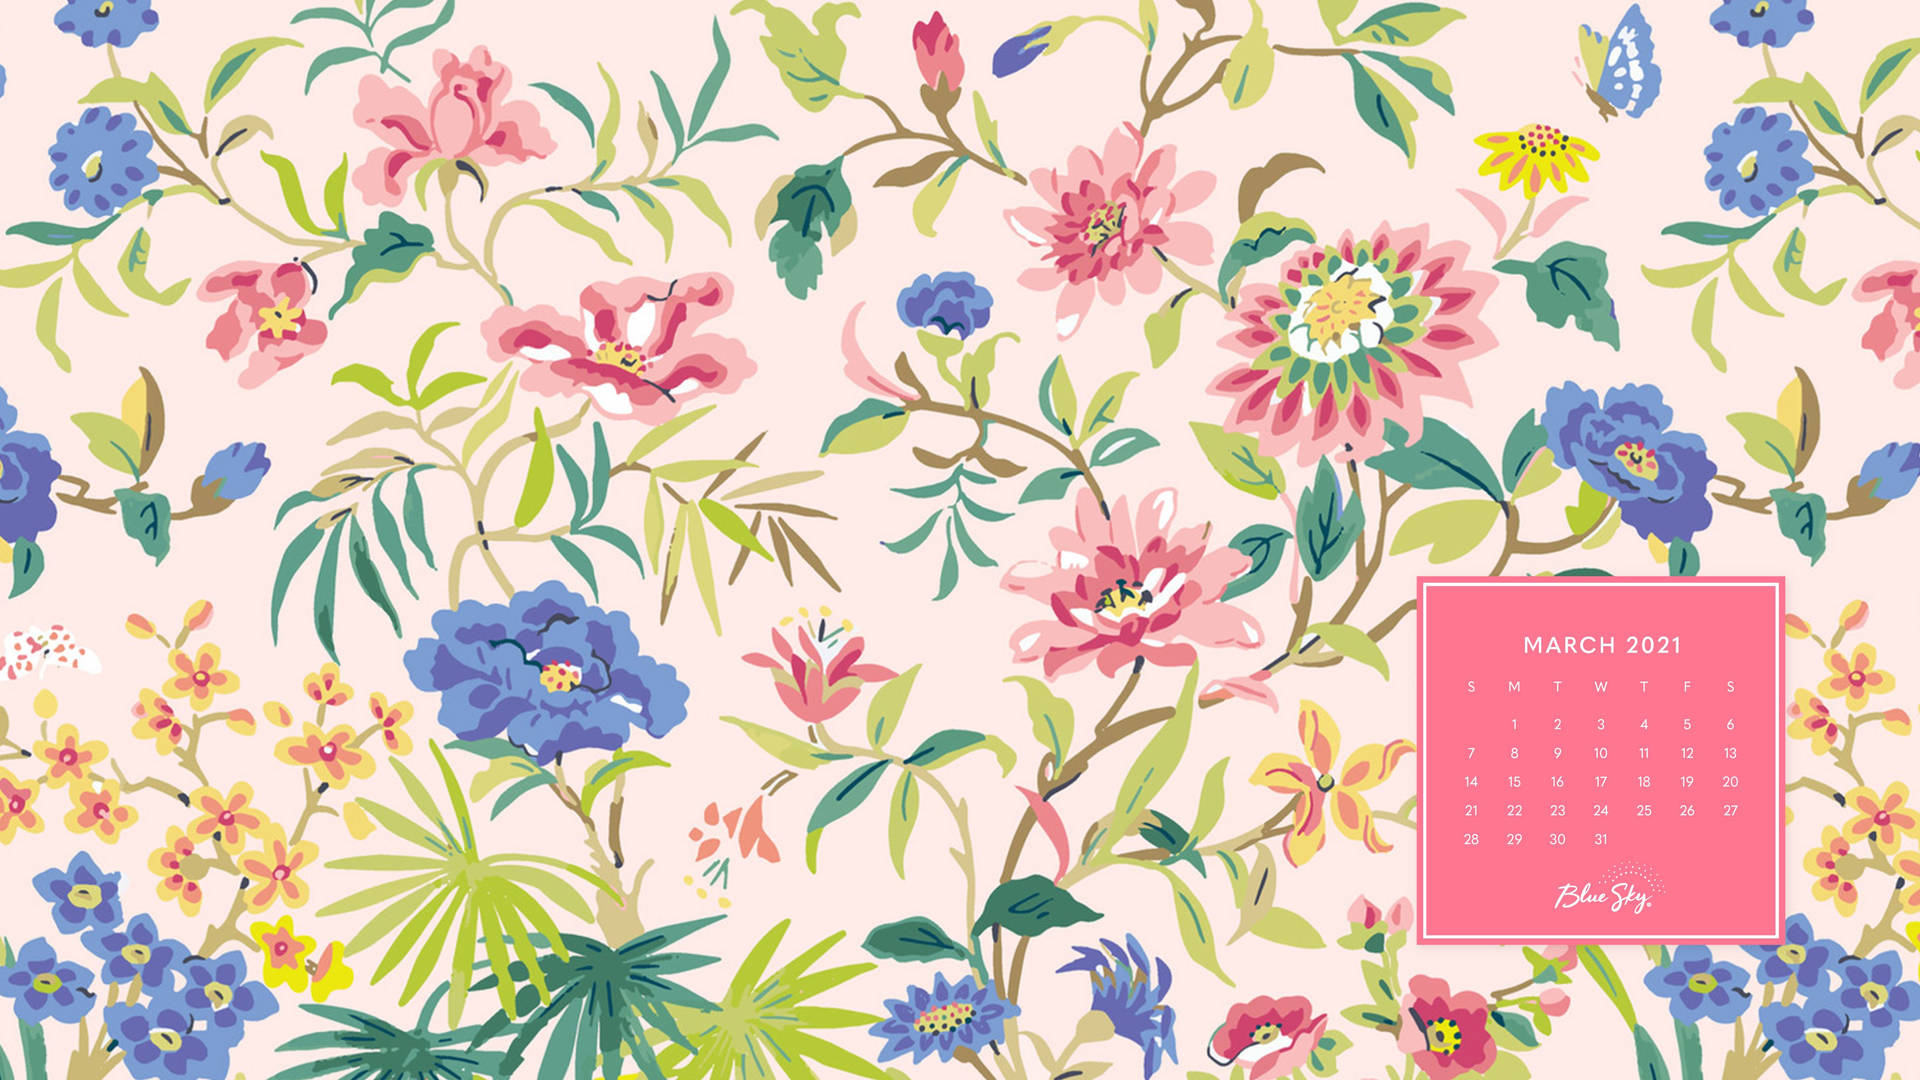 March Calendar With Floral Design Background